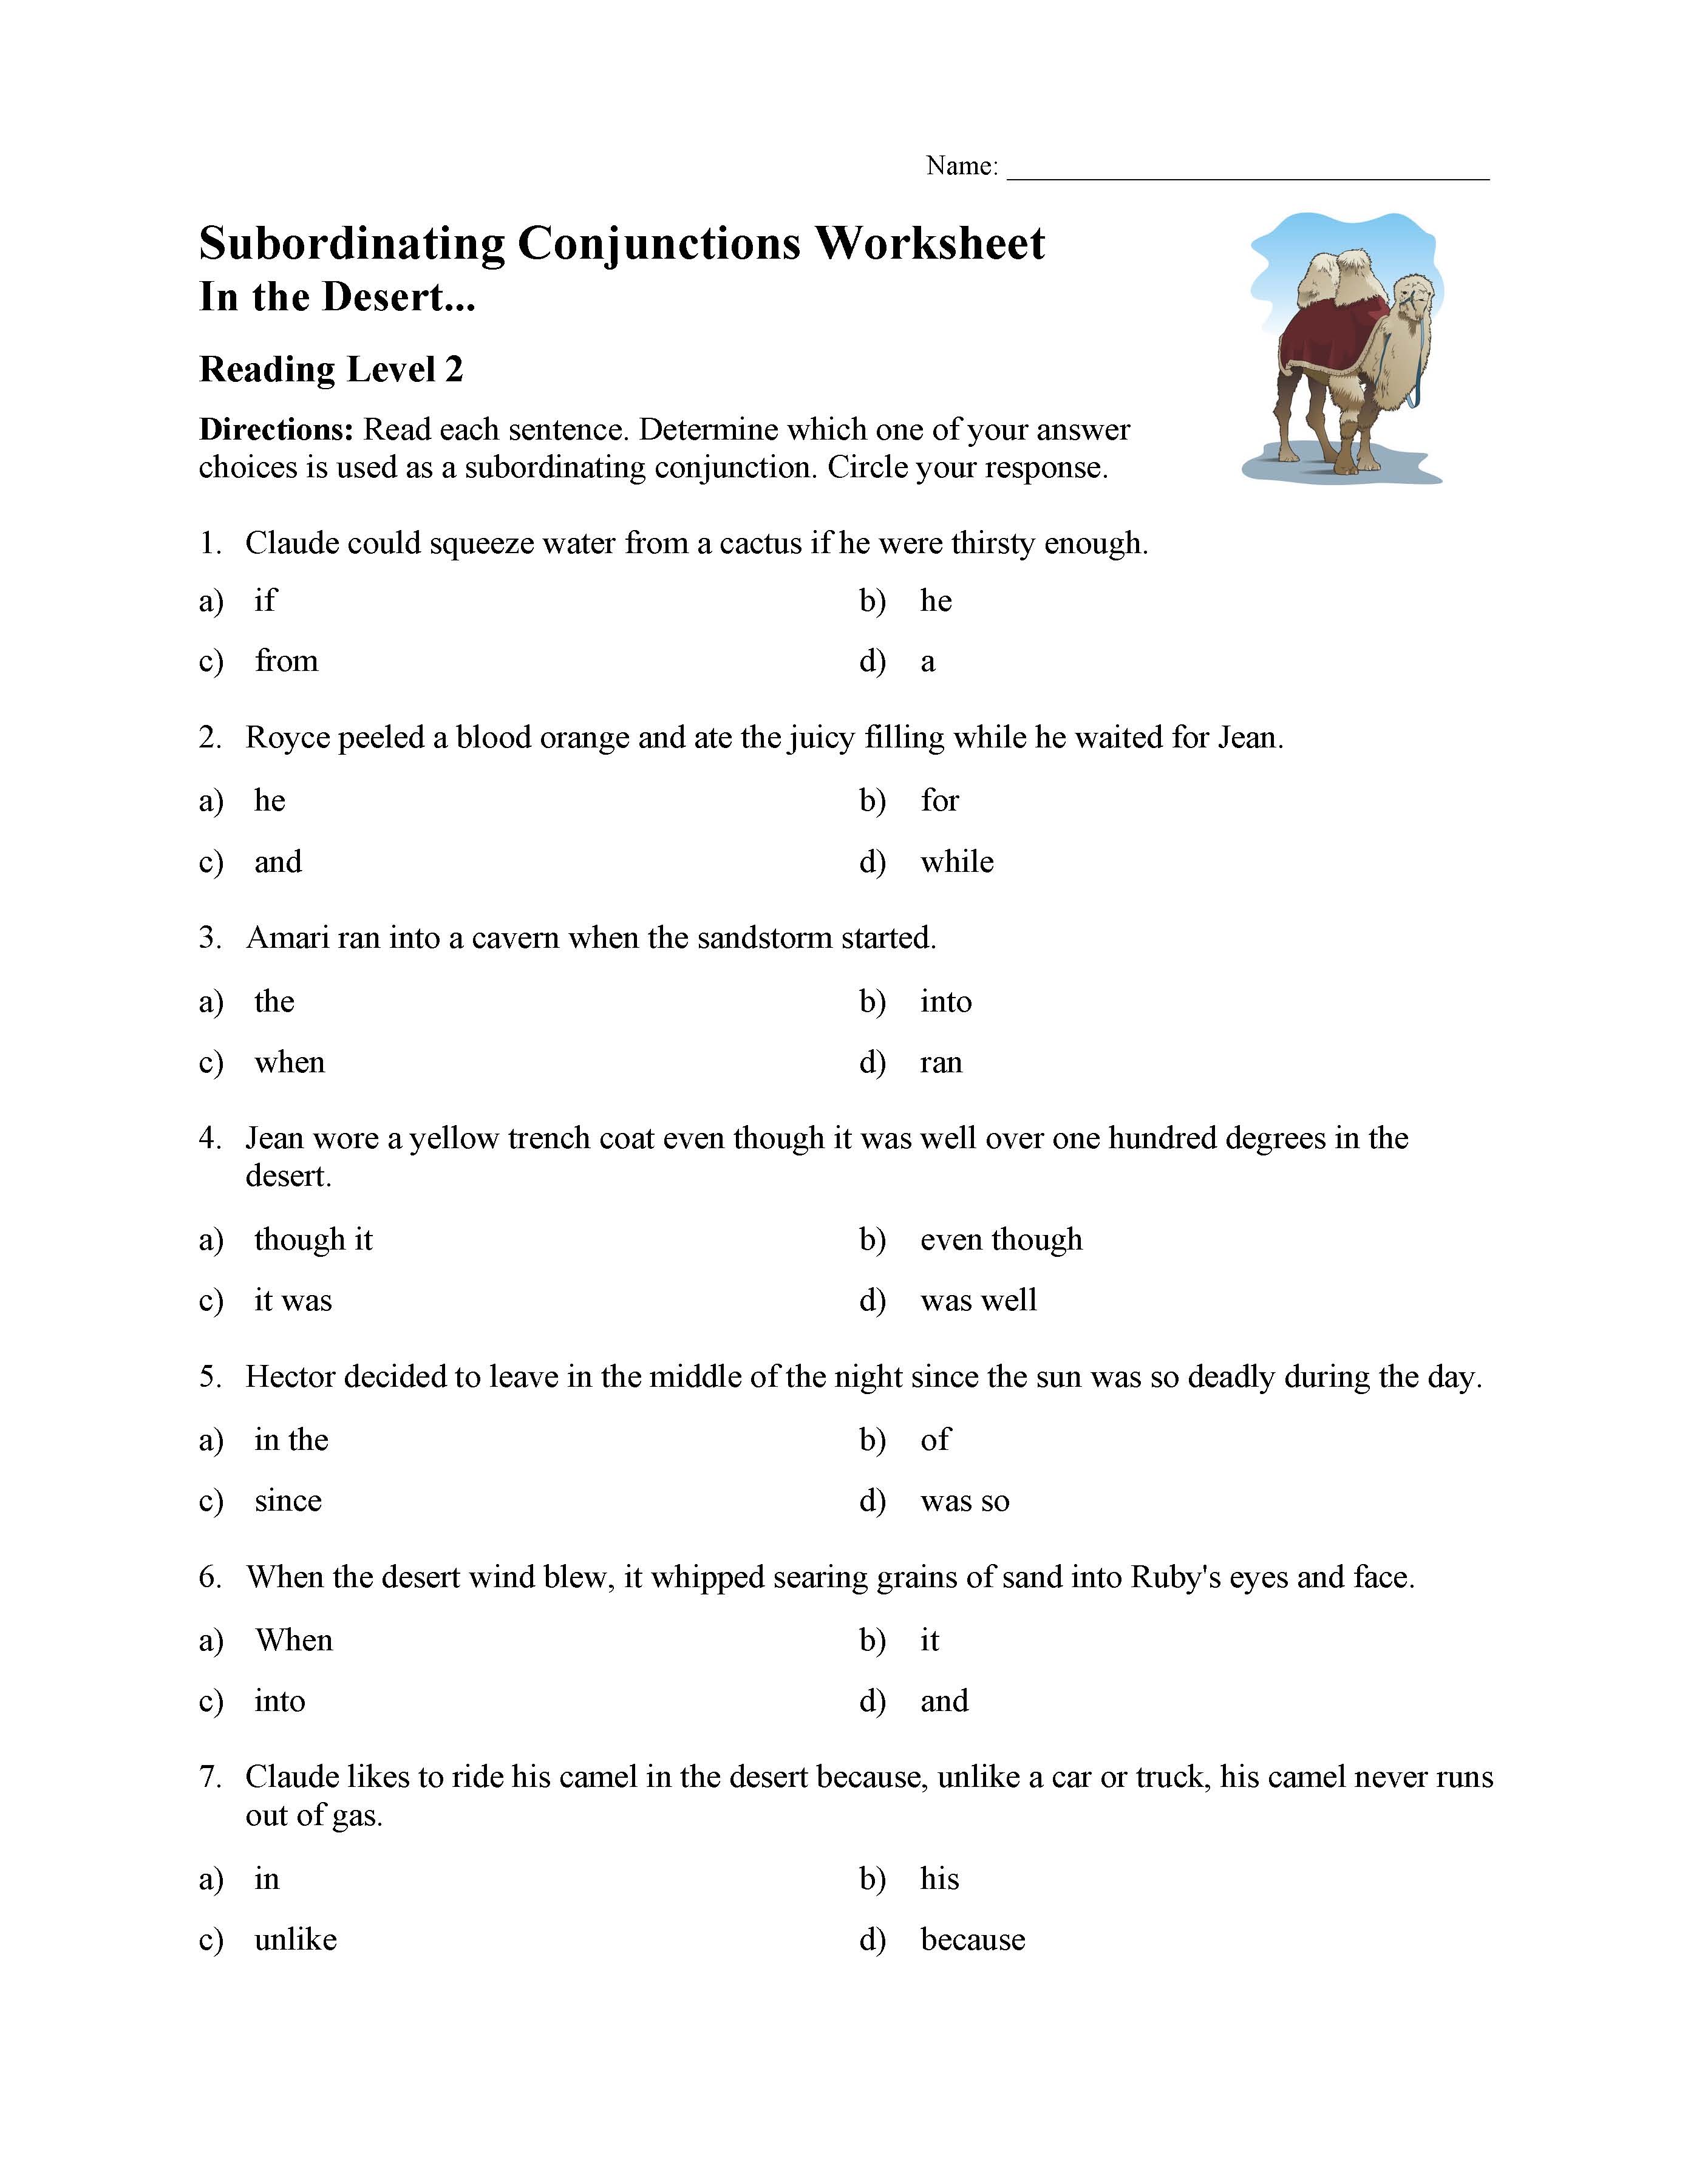 This is a preview image of the Subordinating Conjunctions Worksheet - Reading Level 2.